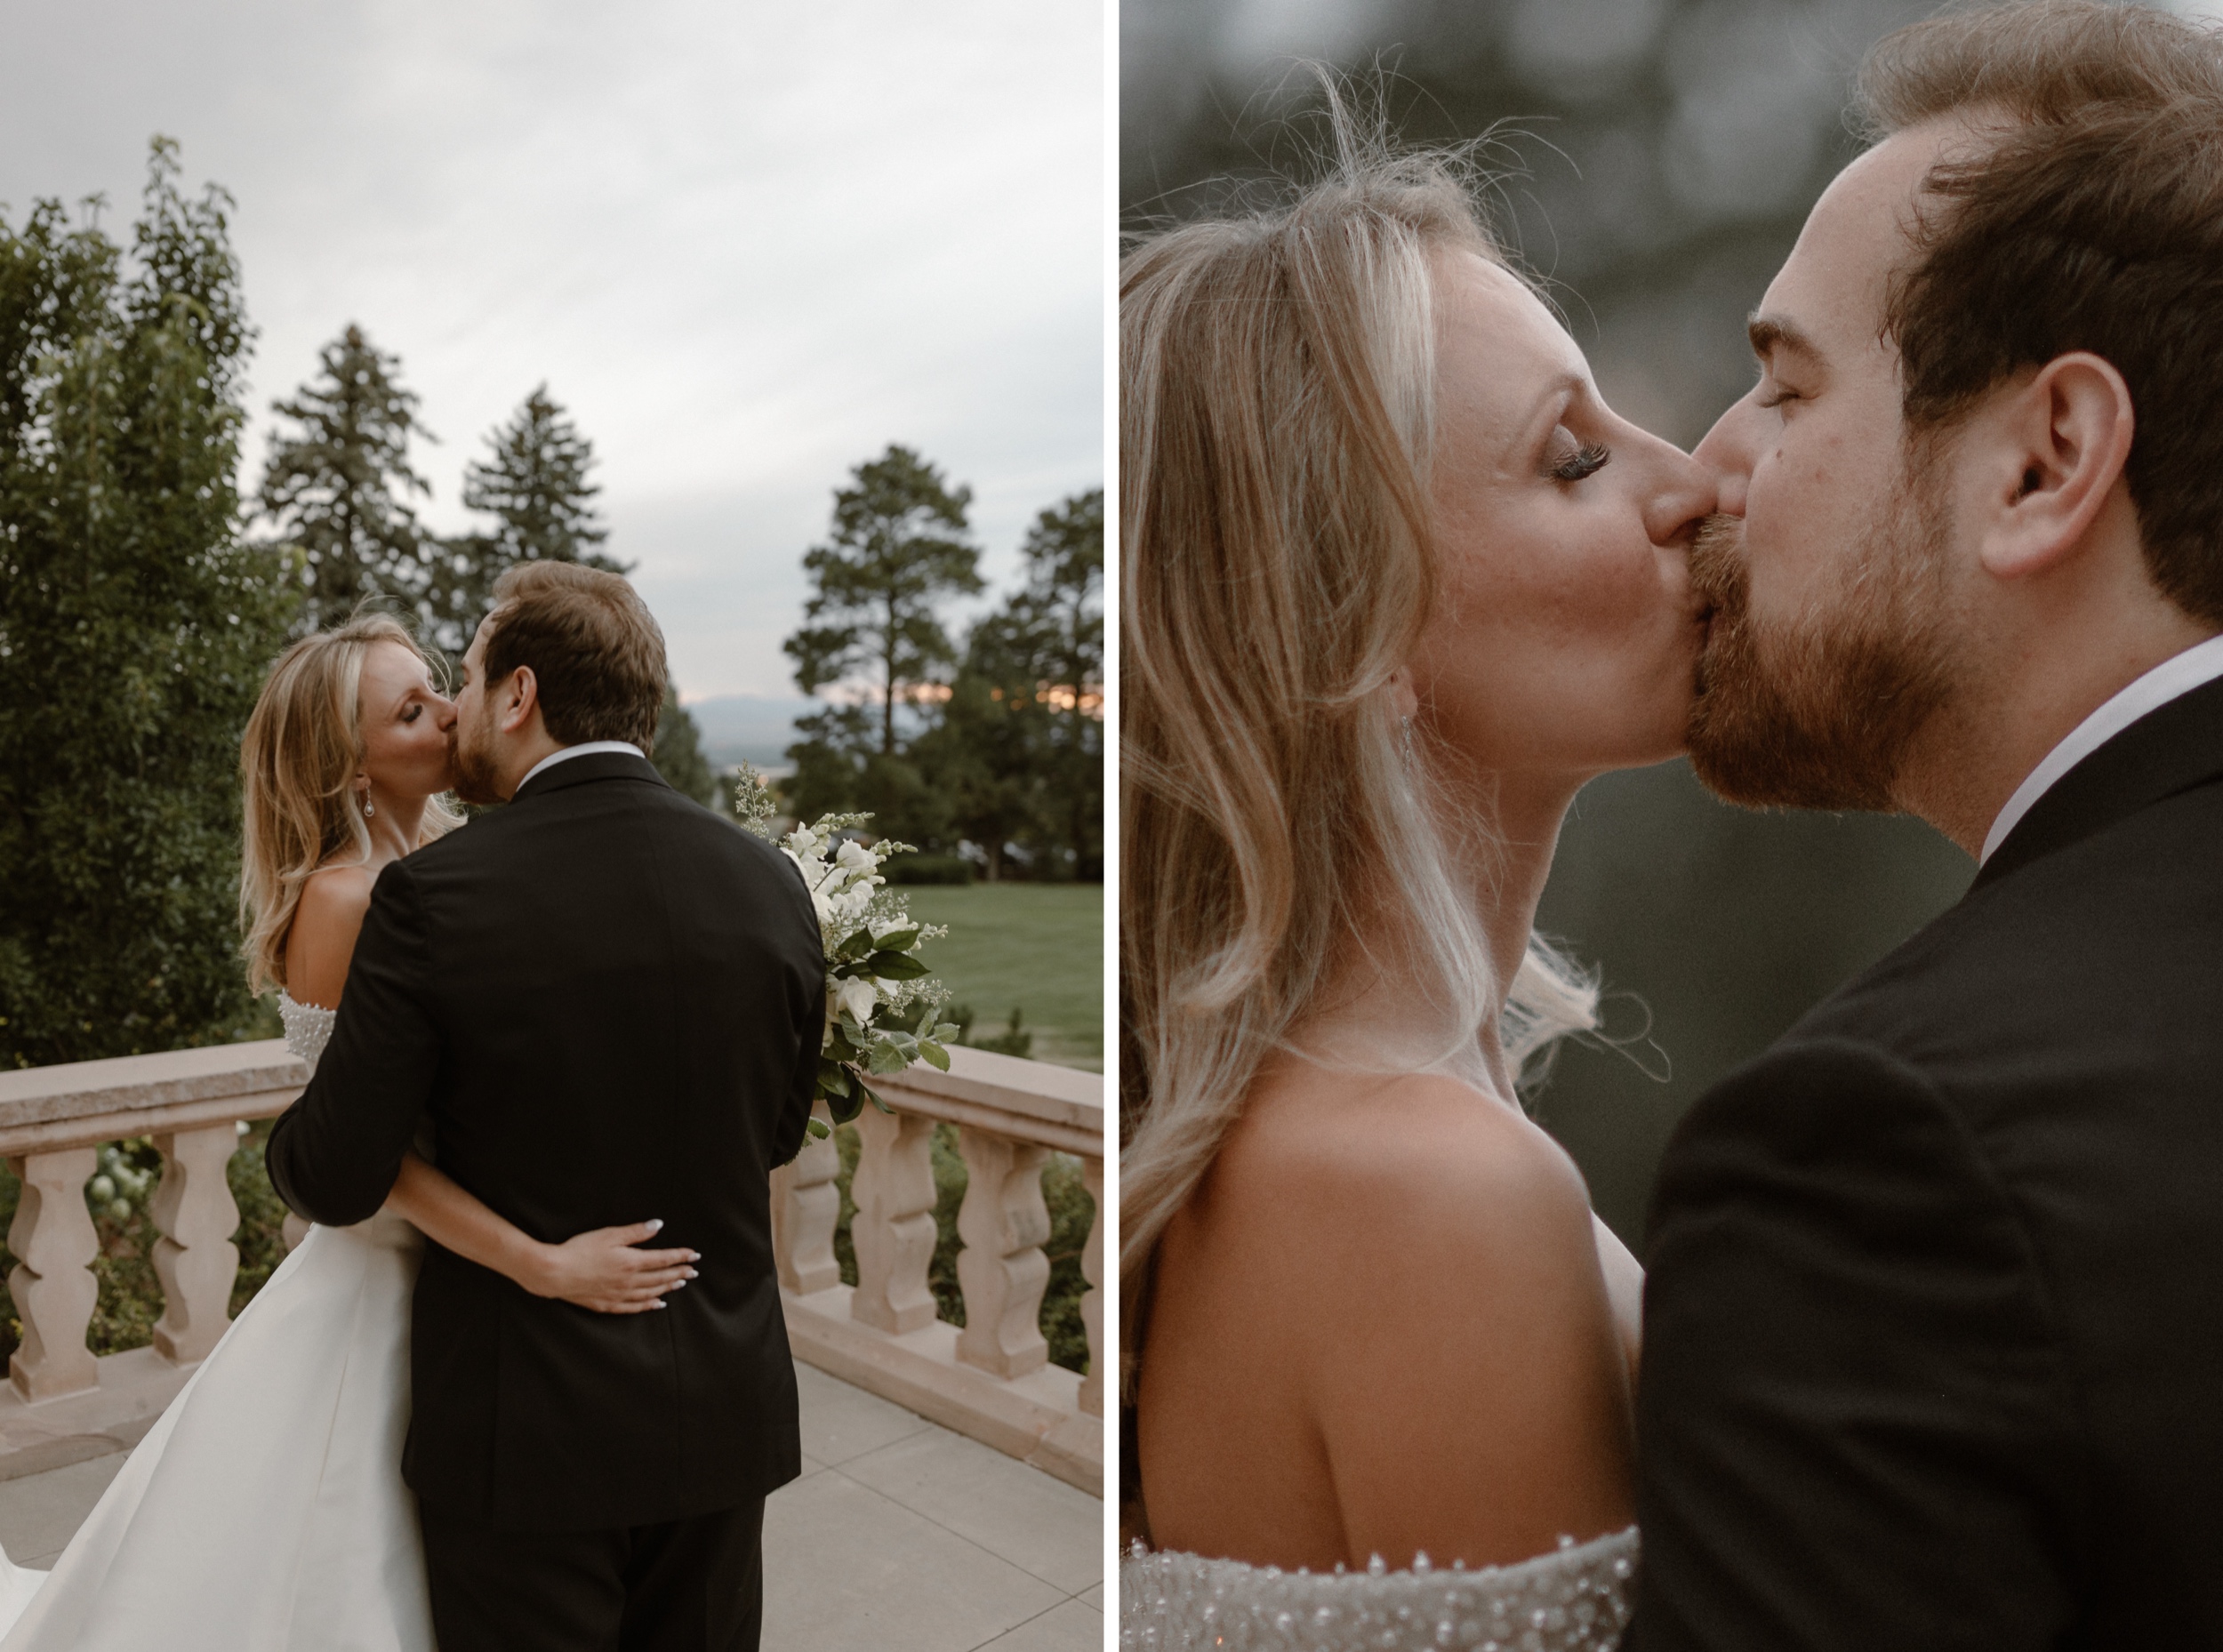 Photos from a luxurious, chic, and stylish Highlands Ranch Mansion wedding that was photographed by Colorado wedding photographer Ashley Joyce.